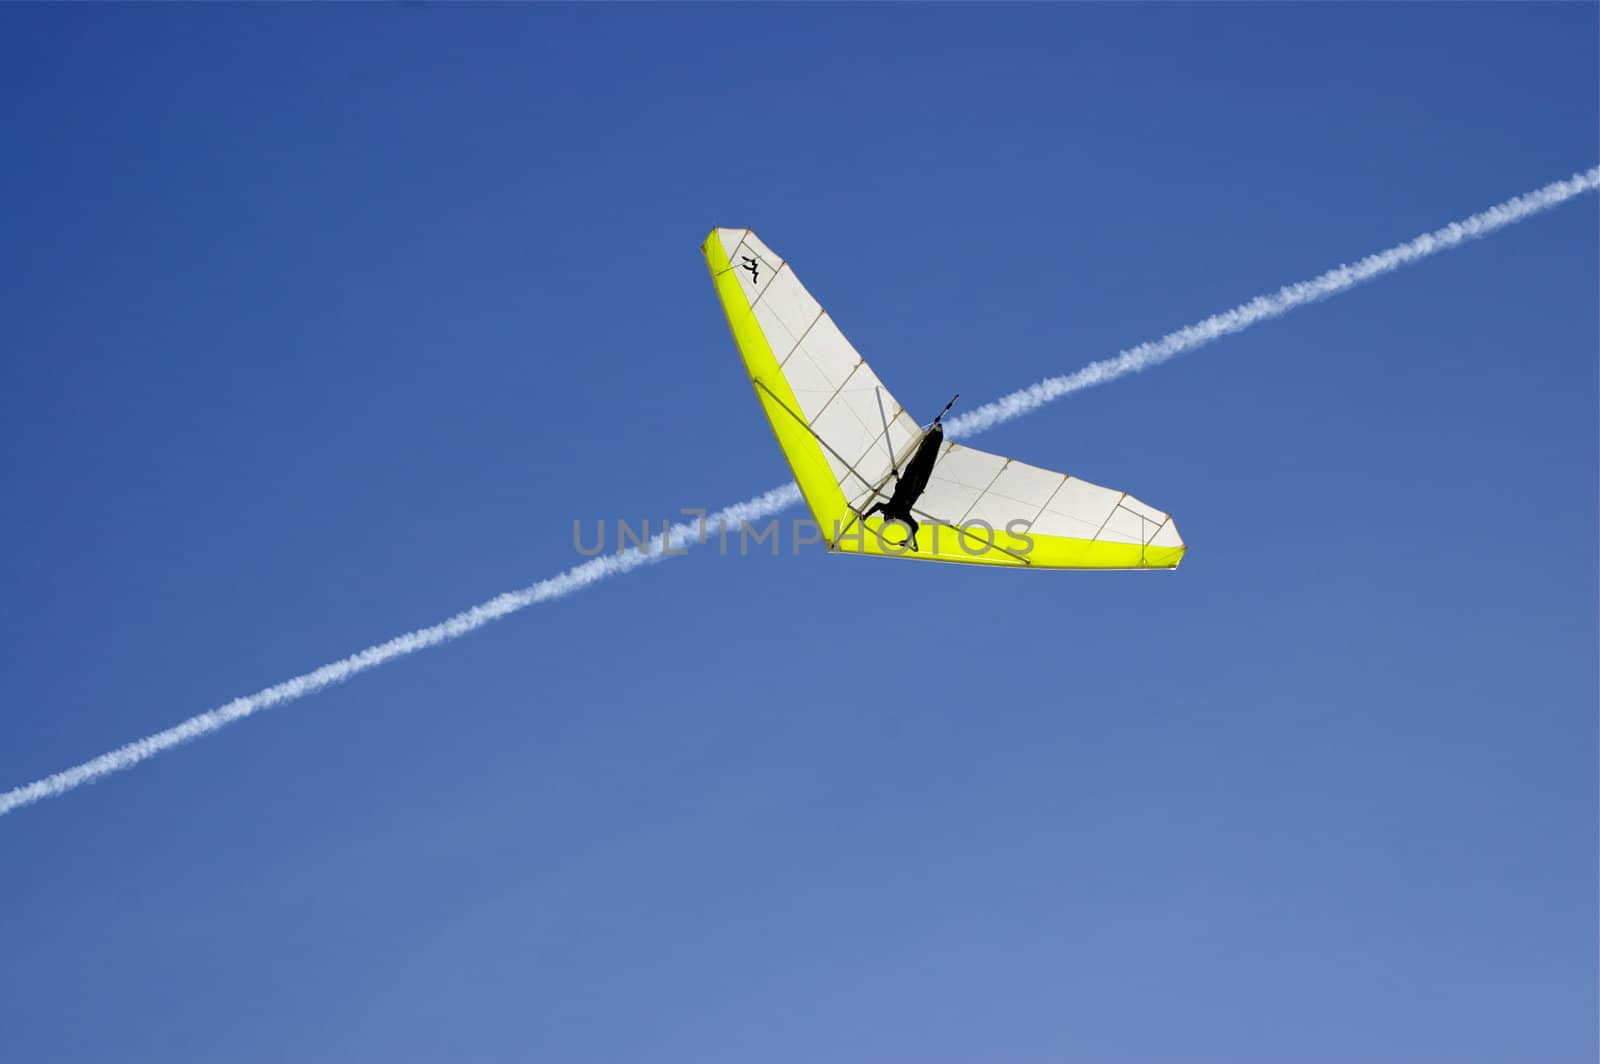 Hang Glider centre against deep blue sky with a white vapour trail criss-crossing image, with copy space.